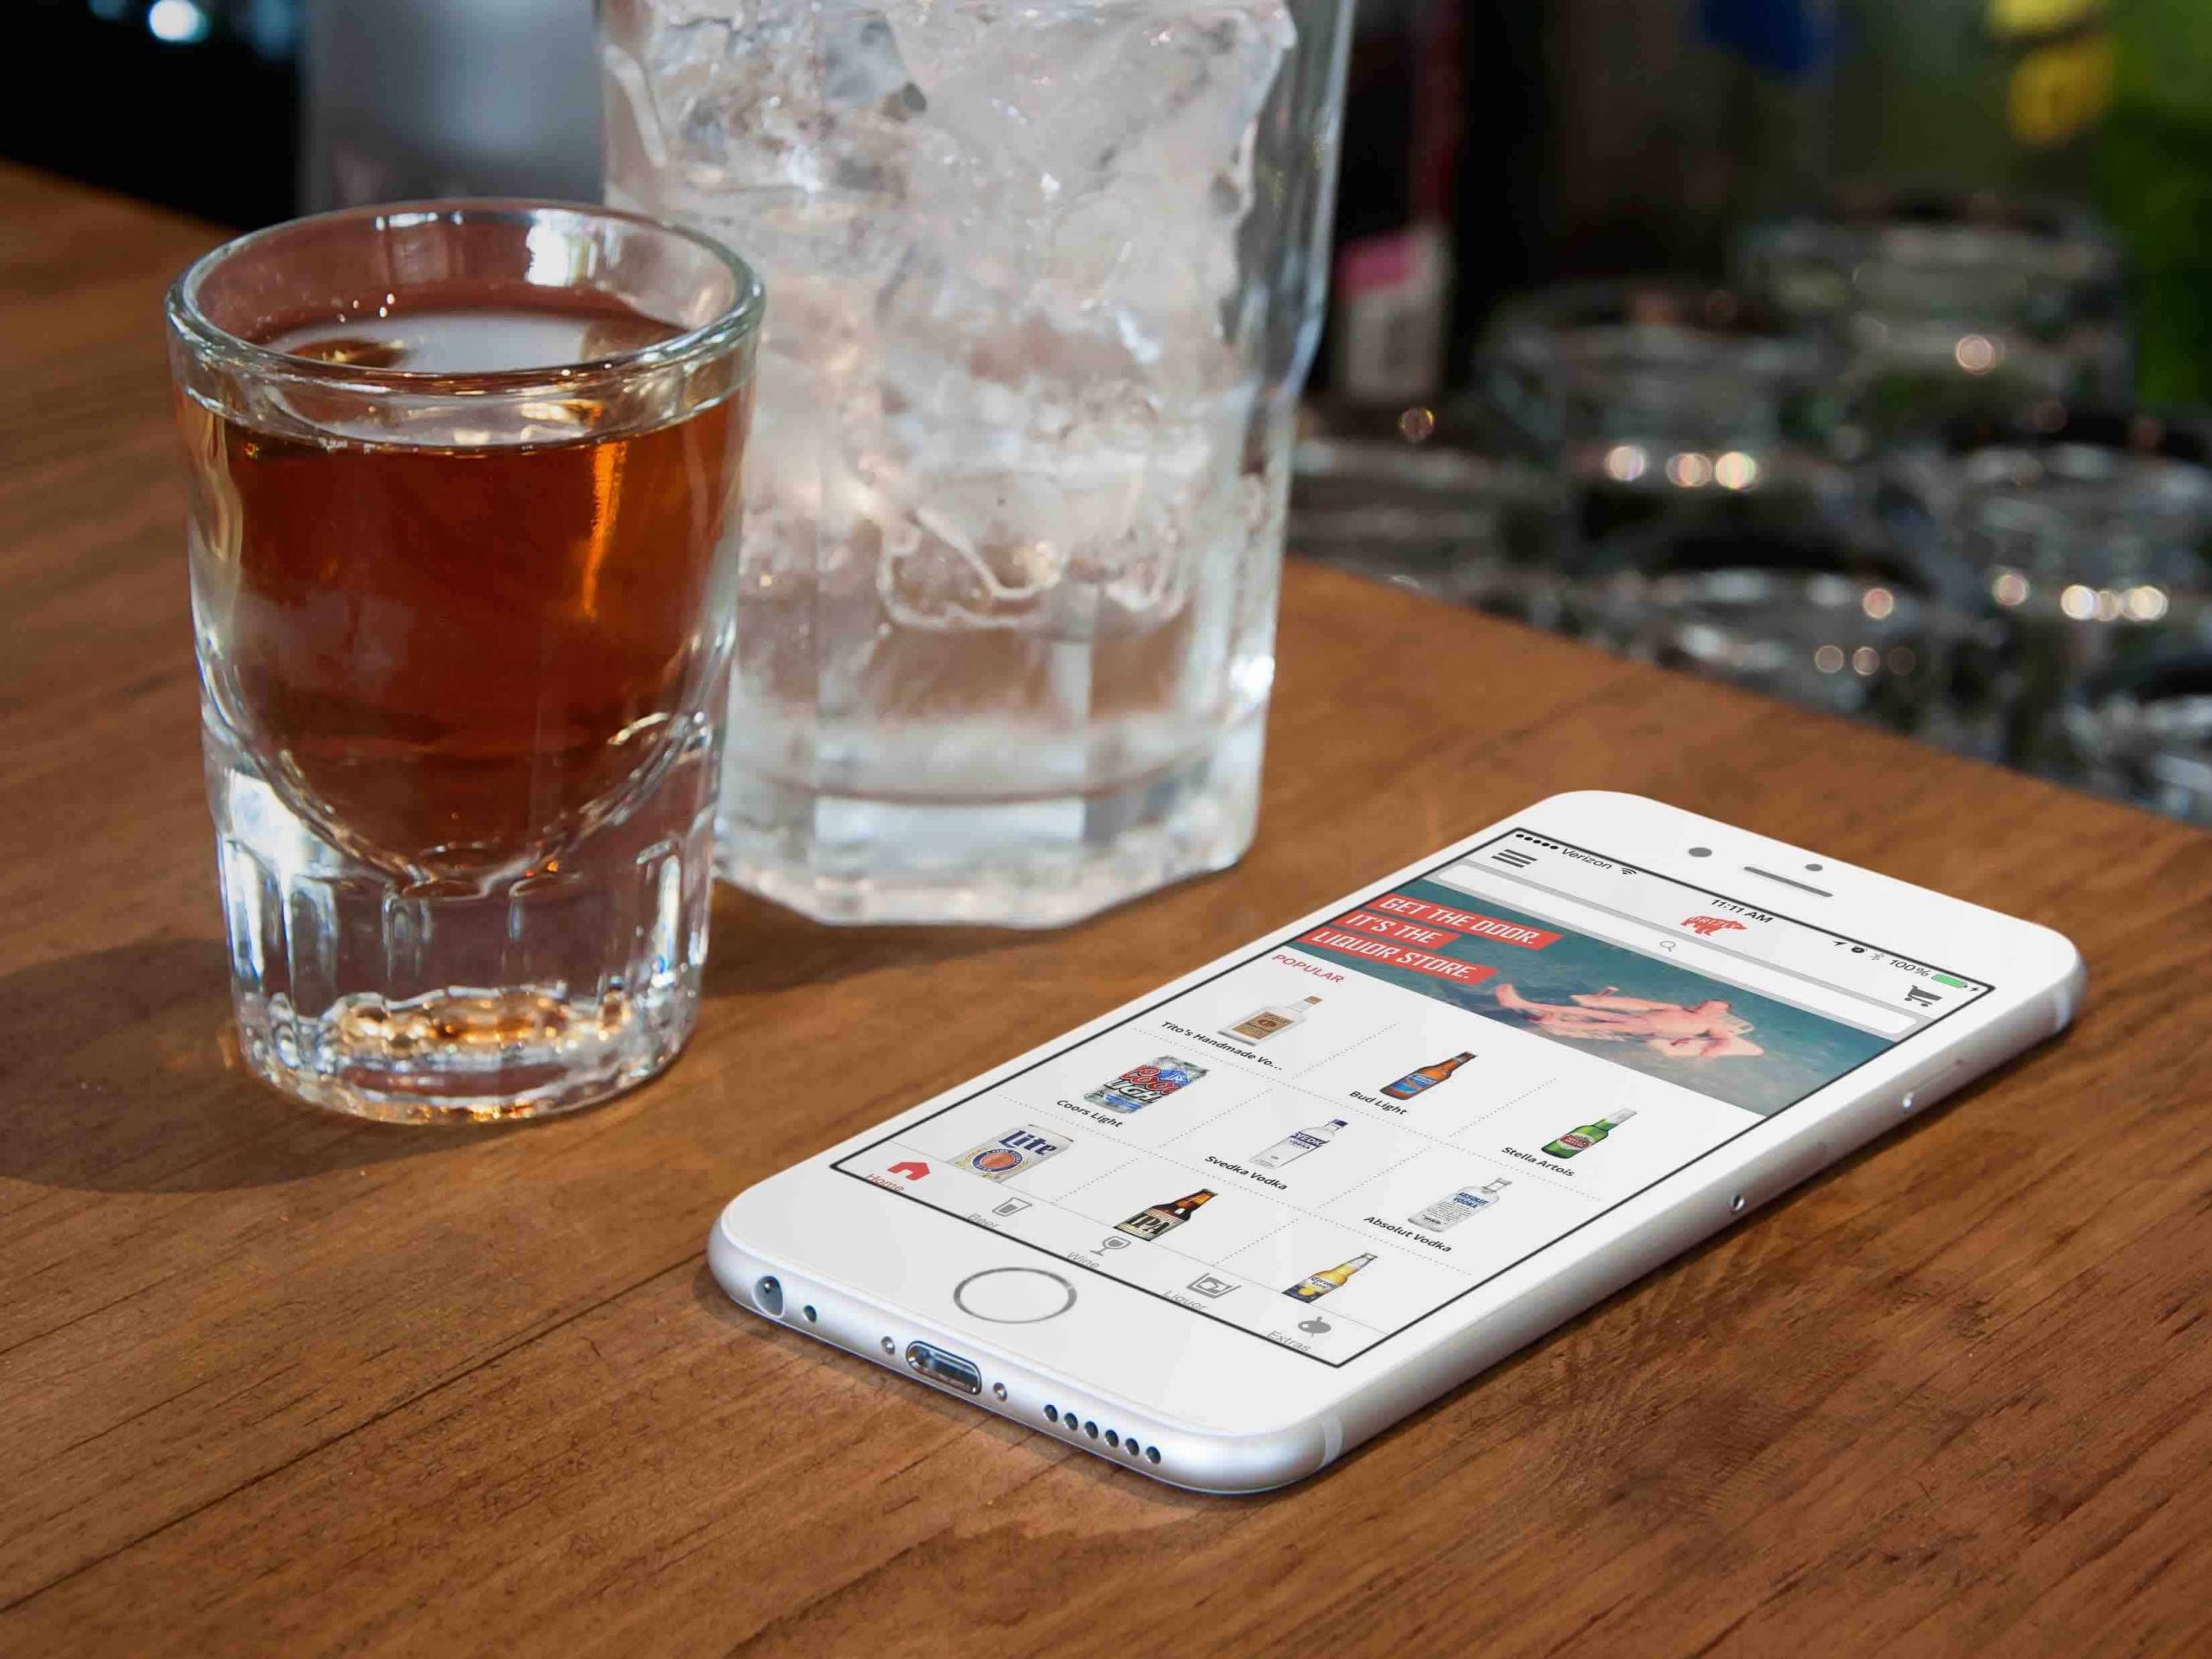 Launch your own on demand Liquor Delivery App like drizly